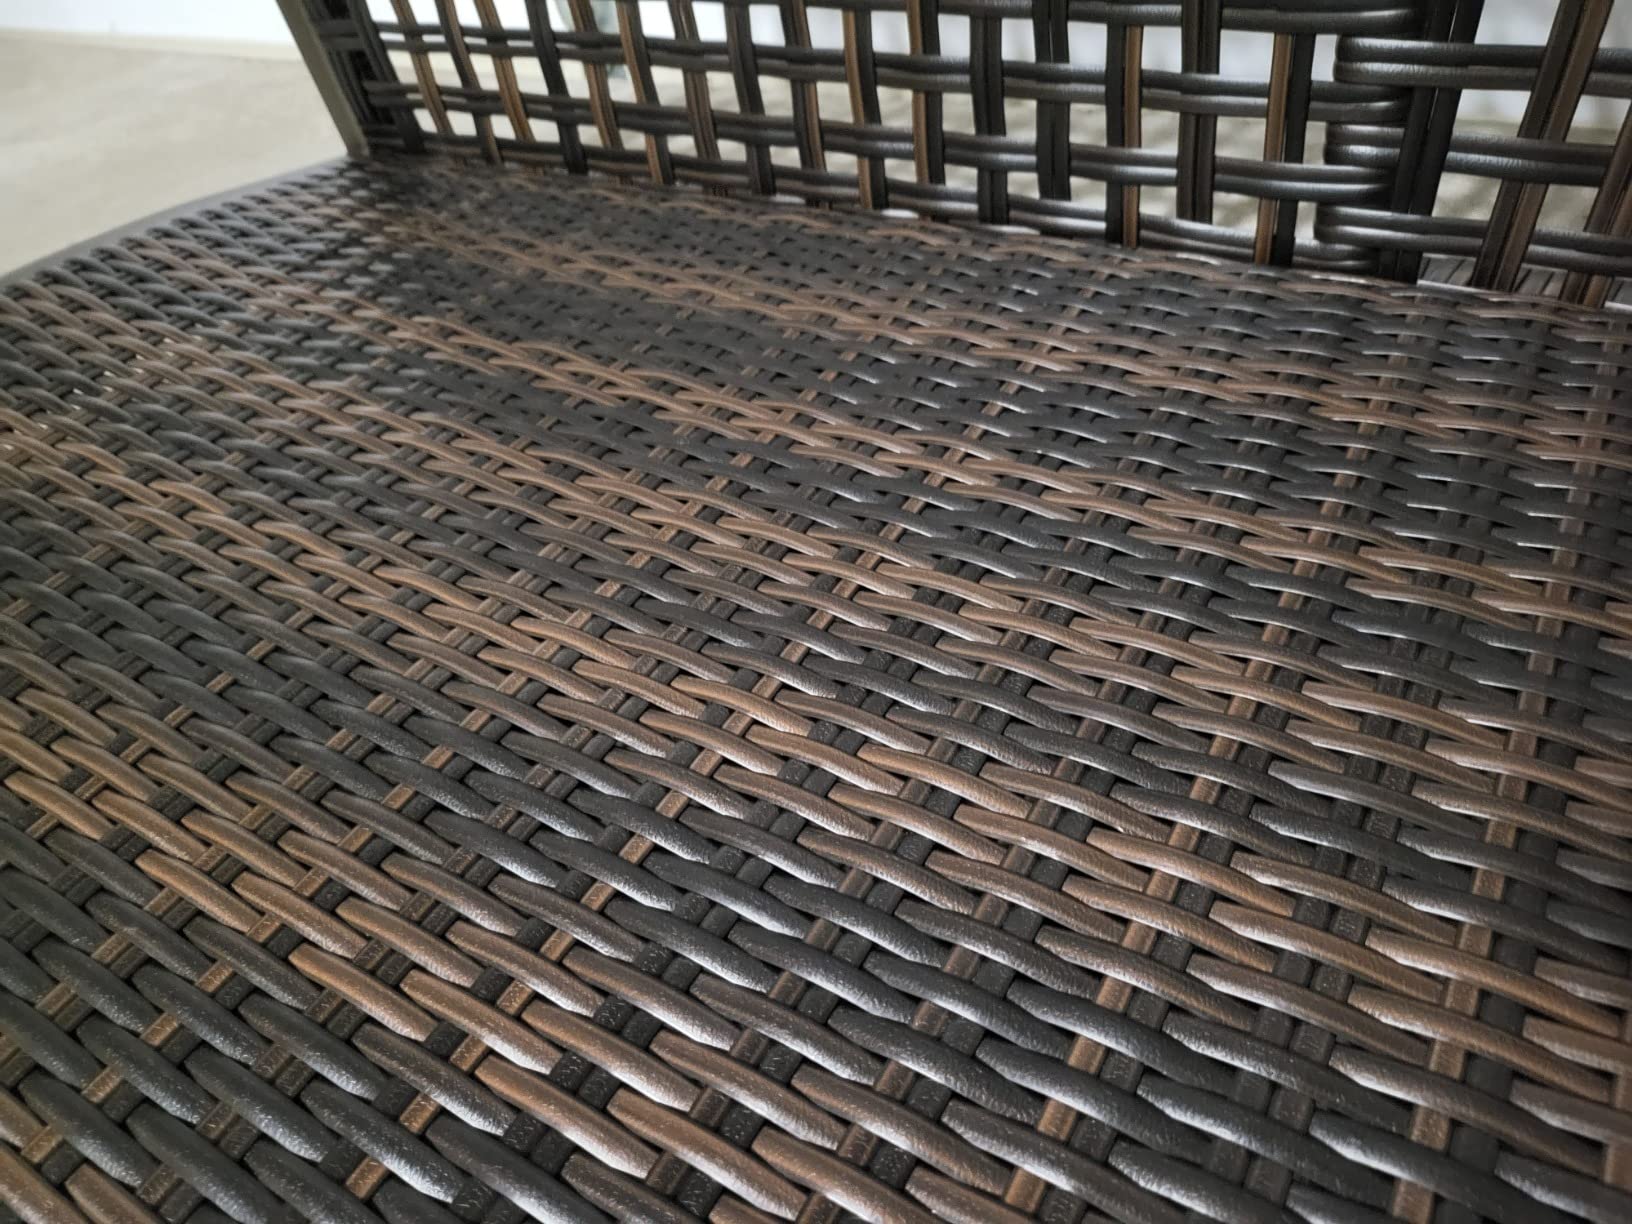 Good quality, very comfortable, solid frame, and nice wicker weave.  Very easy to assemble too.